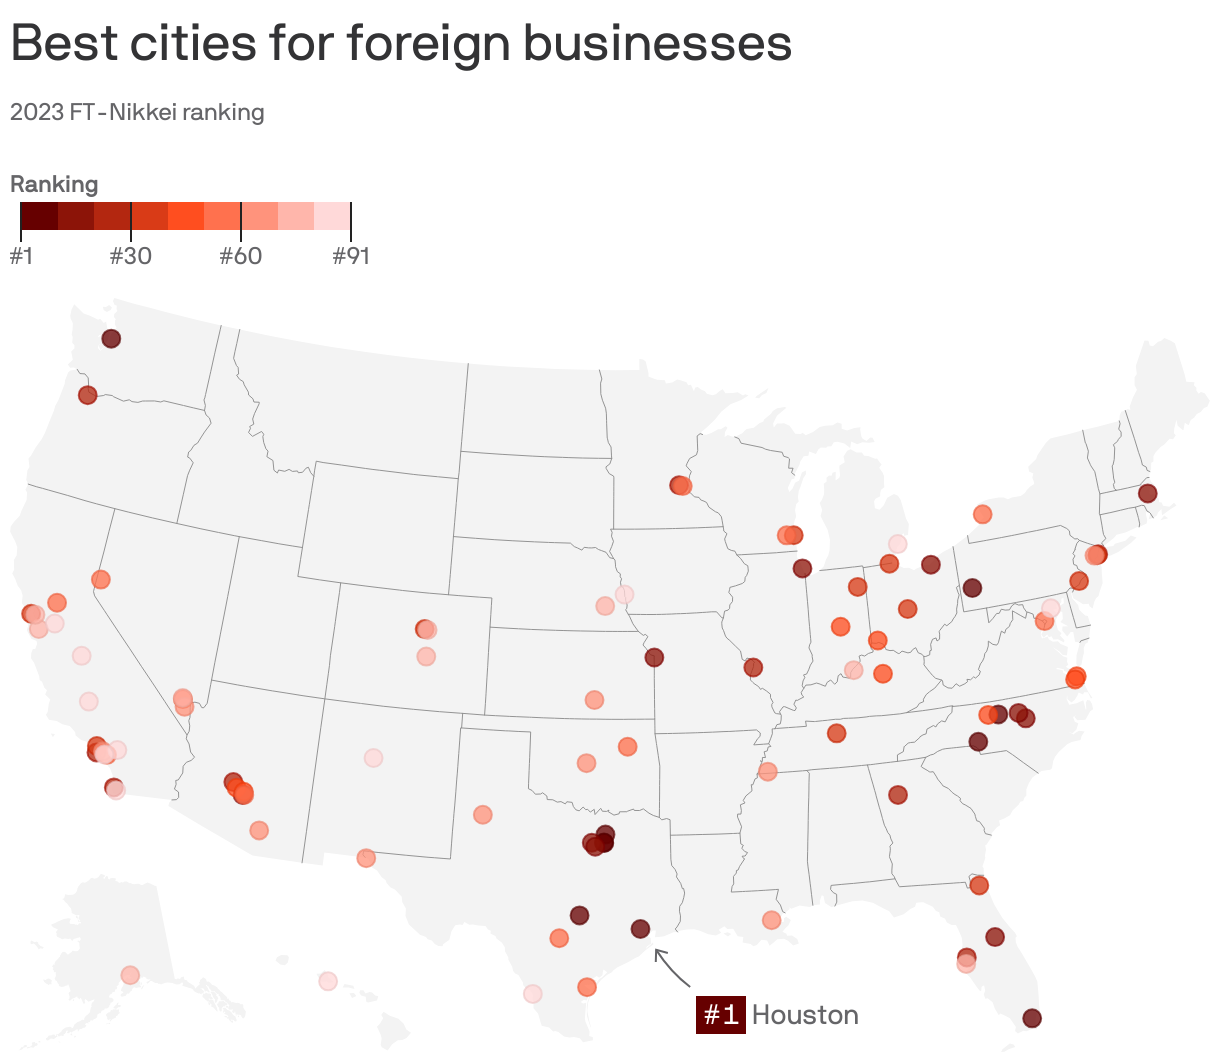 Best cities for foreign businesses